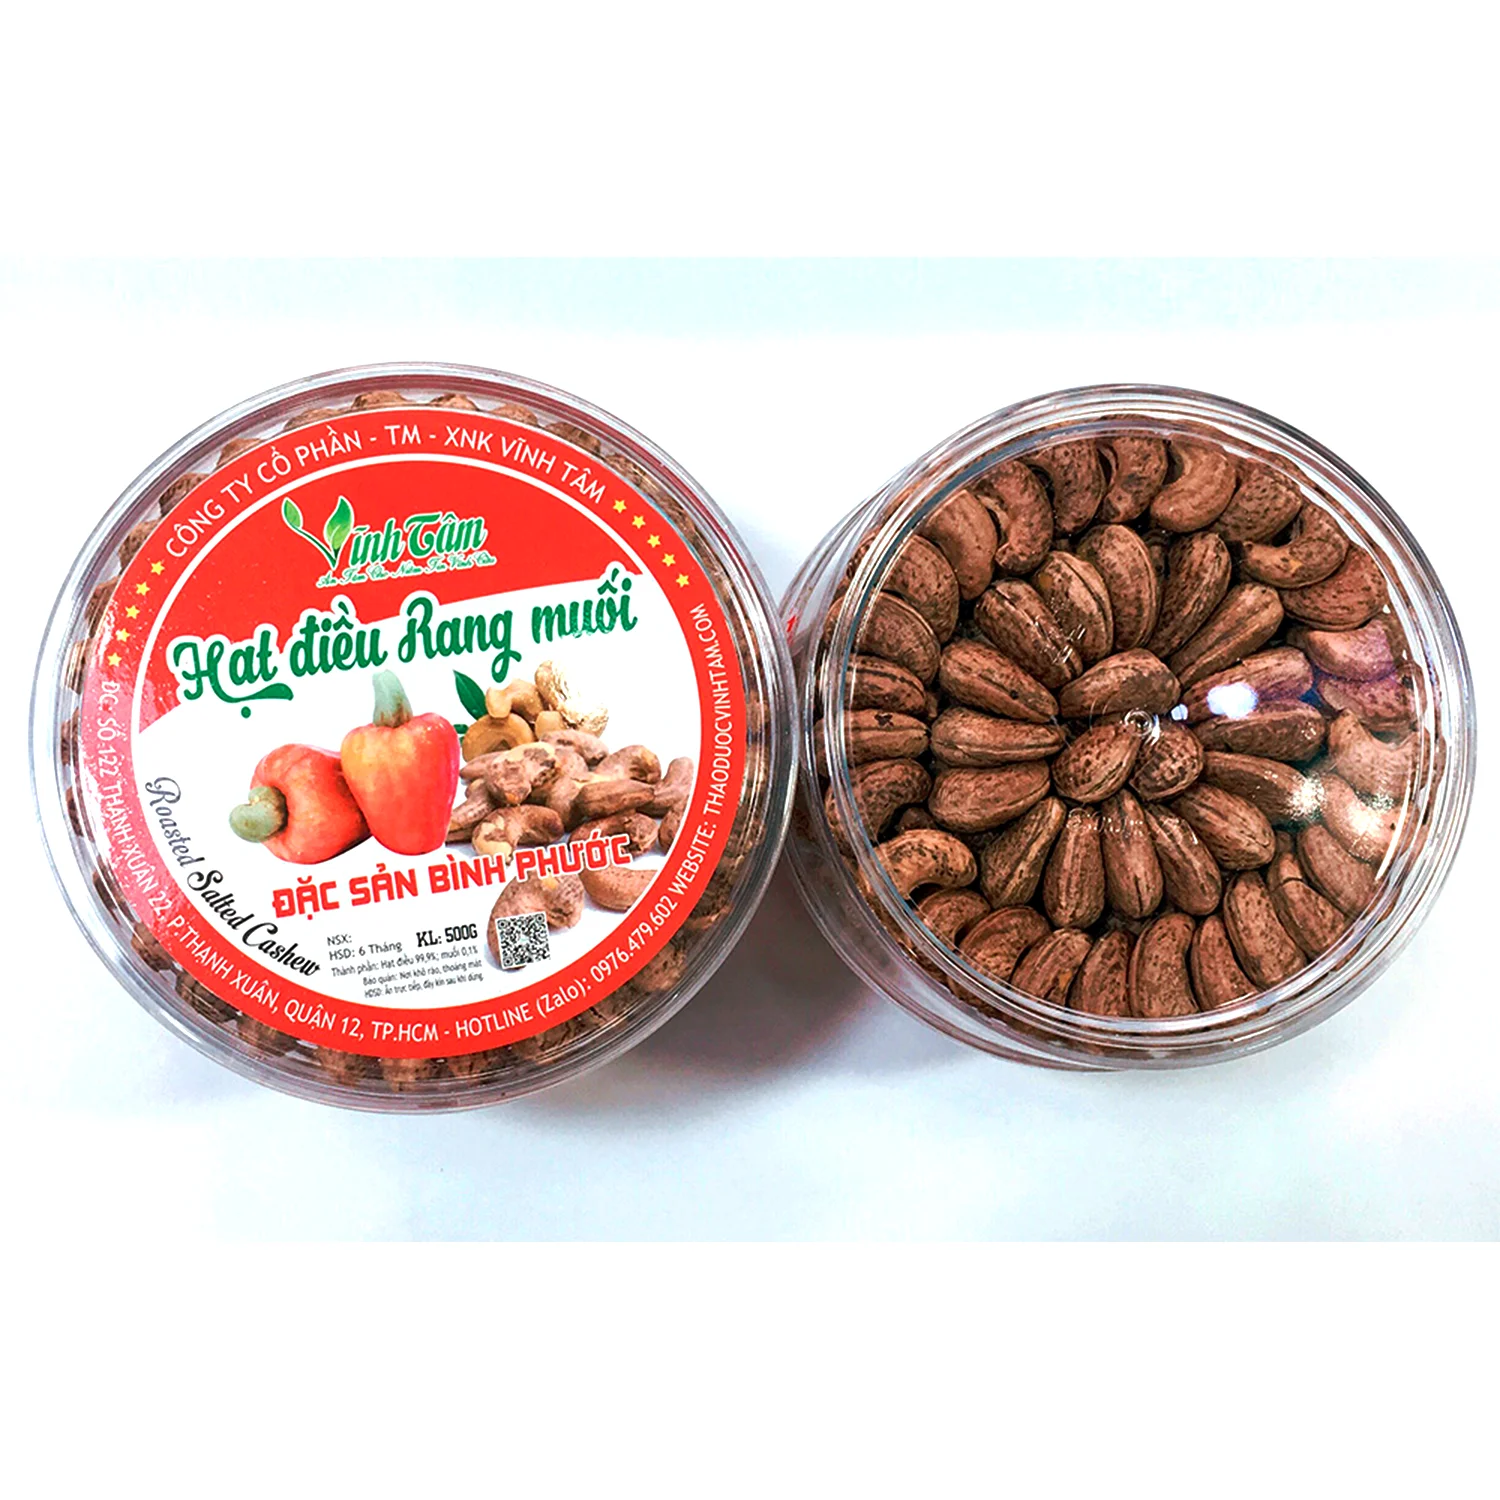 
Salted Roasted Cashews Fresh Nuts Best High Quality Products From Viet Nam V-Store Private Label 